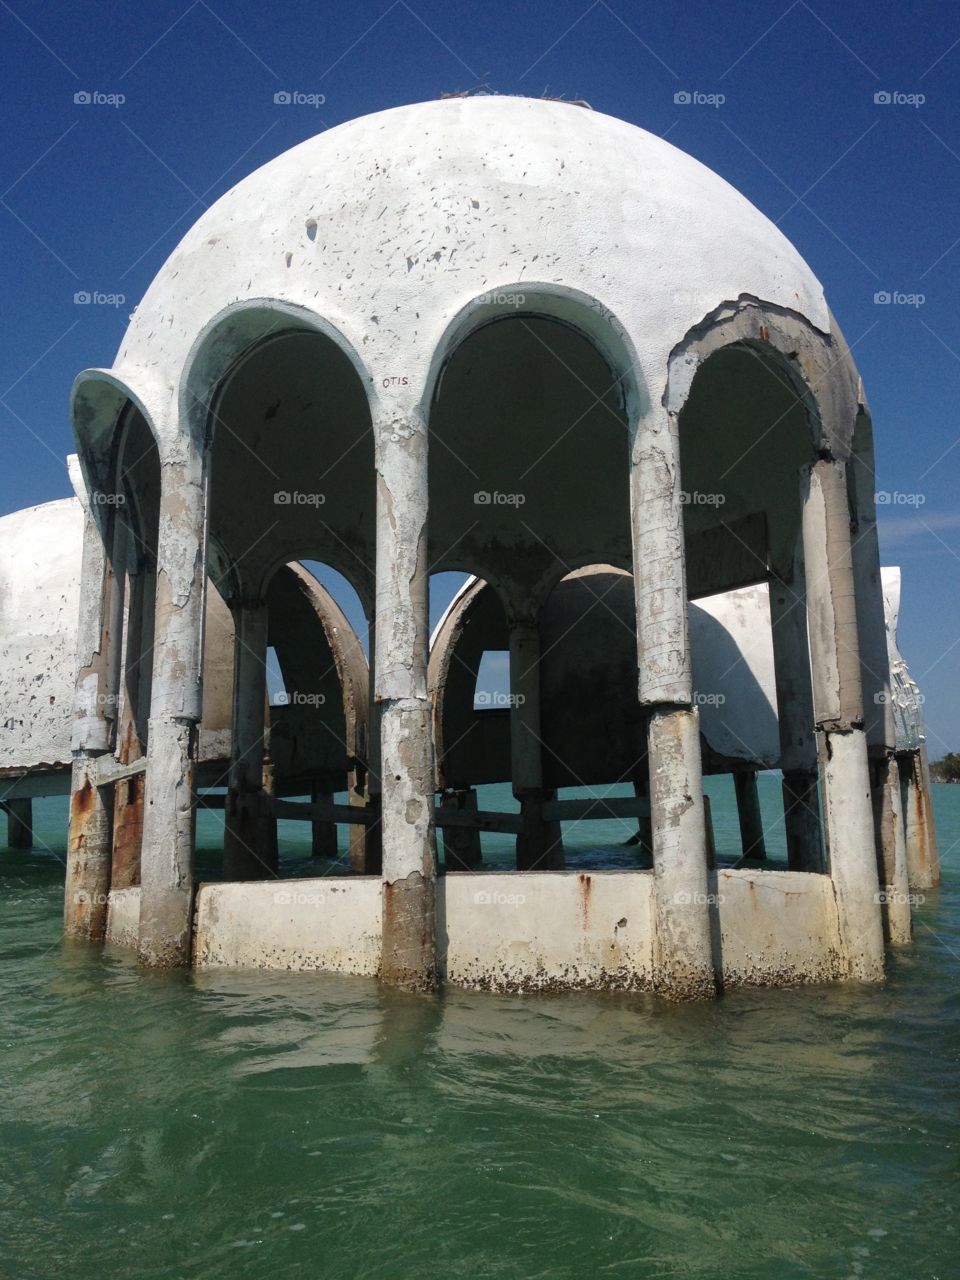 Atlantis revealed. A unique dome style home sits in the middle of the Gulf of Mexico awaiting a slow sink to the bottom. 